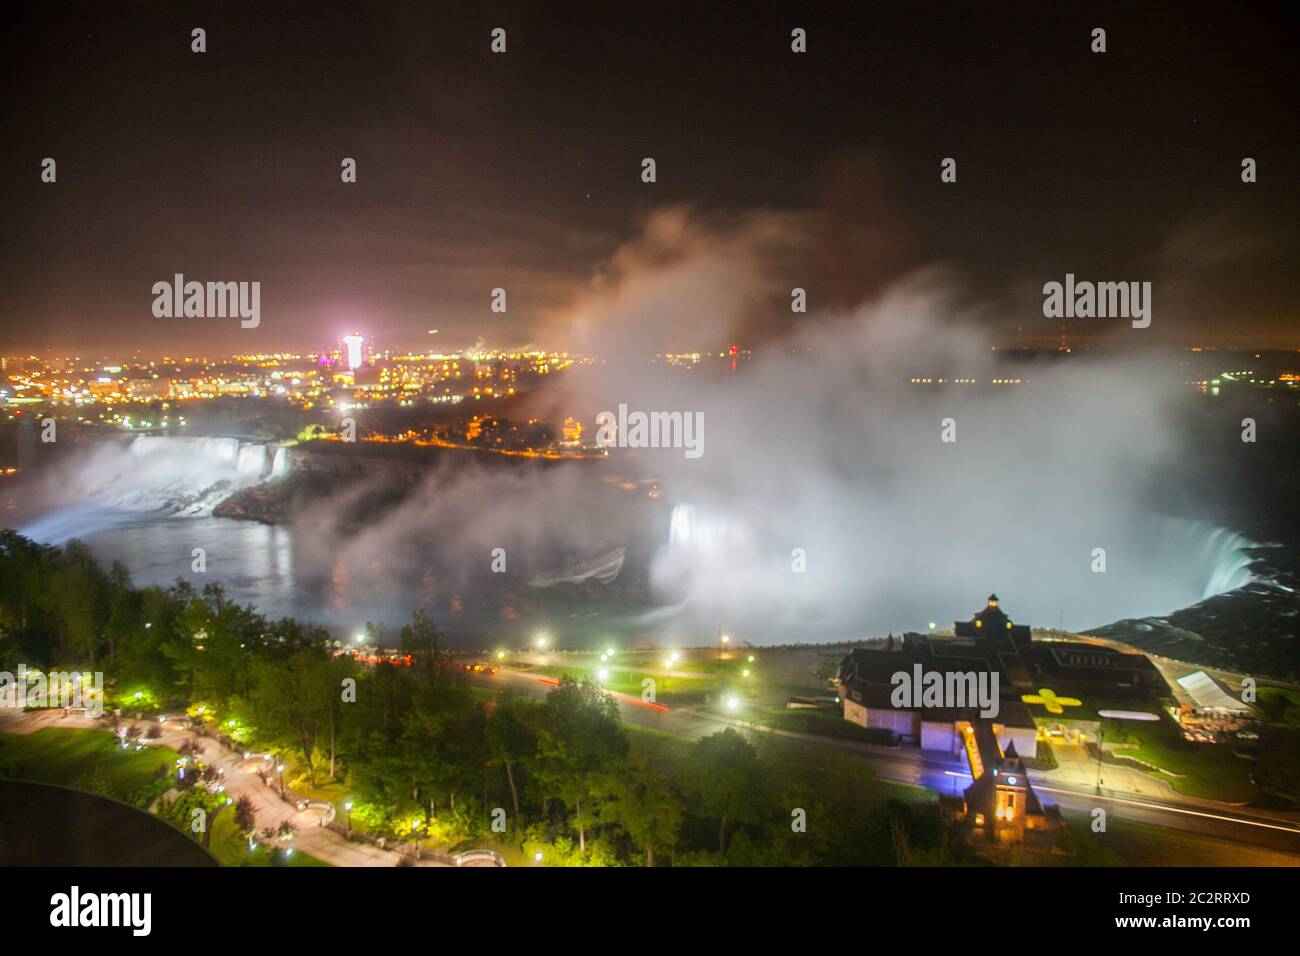 Scenic view from above of Niagara falls at night, with colorful lights on water, Niagara Falls, Ontario, Canada Stock Photo